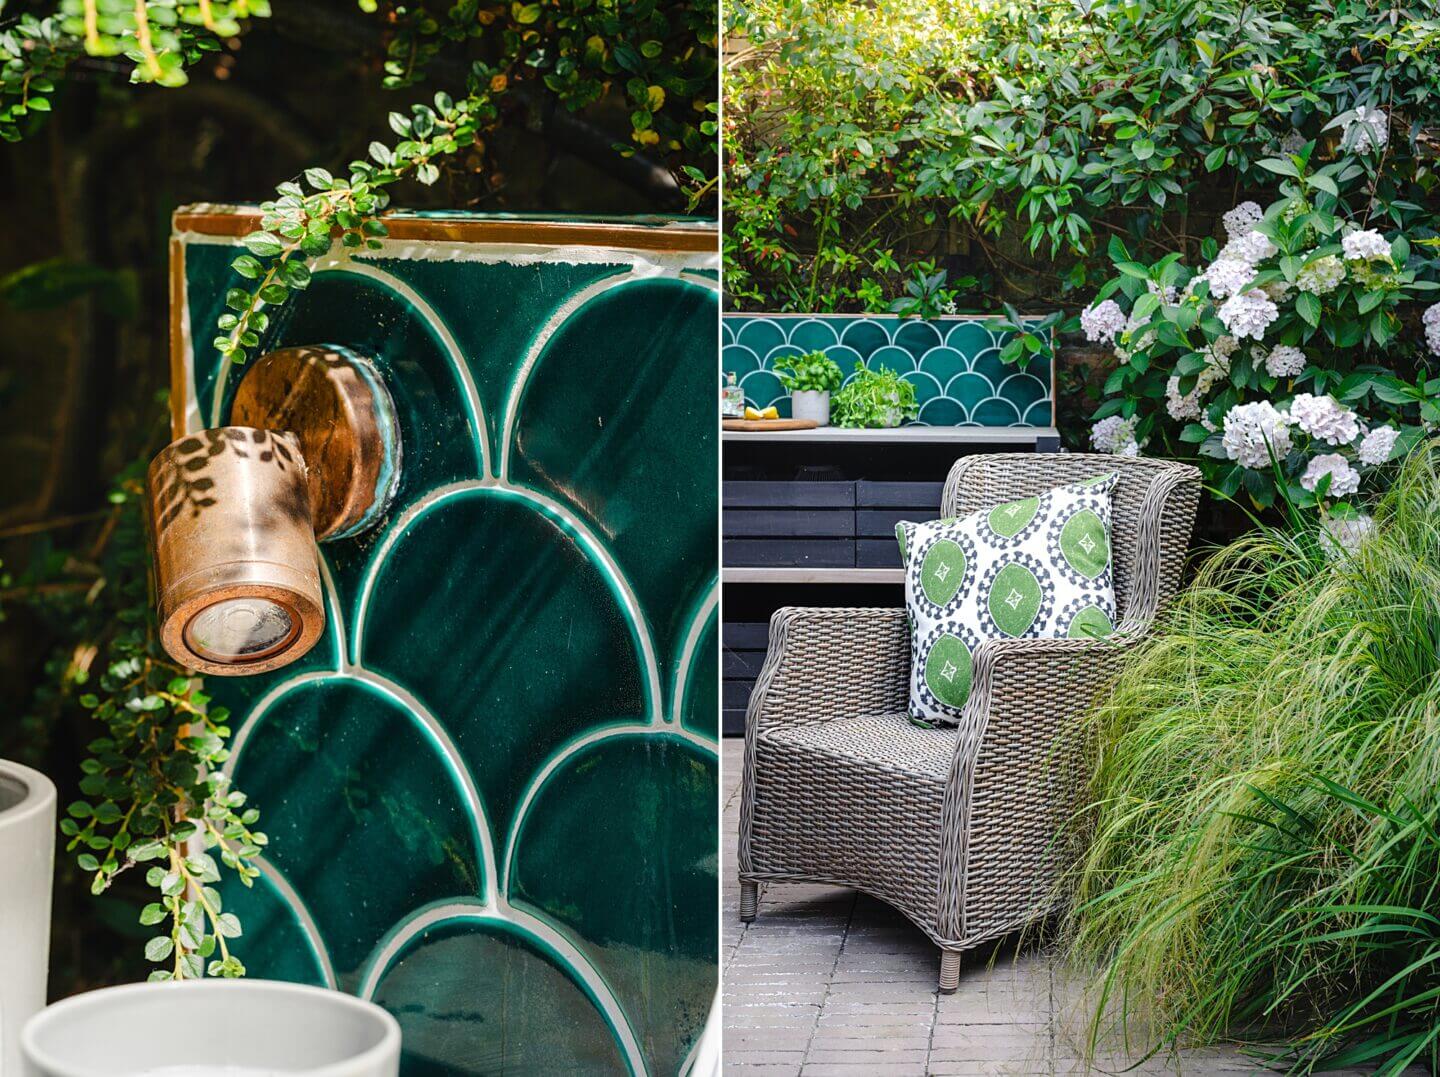 Green tile details and brass lighting with wicker seating and Hydrangea